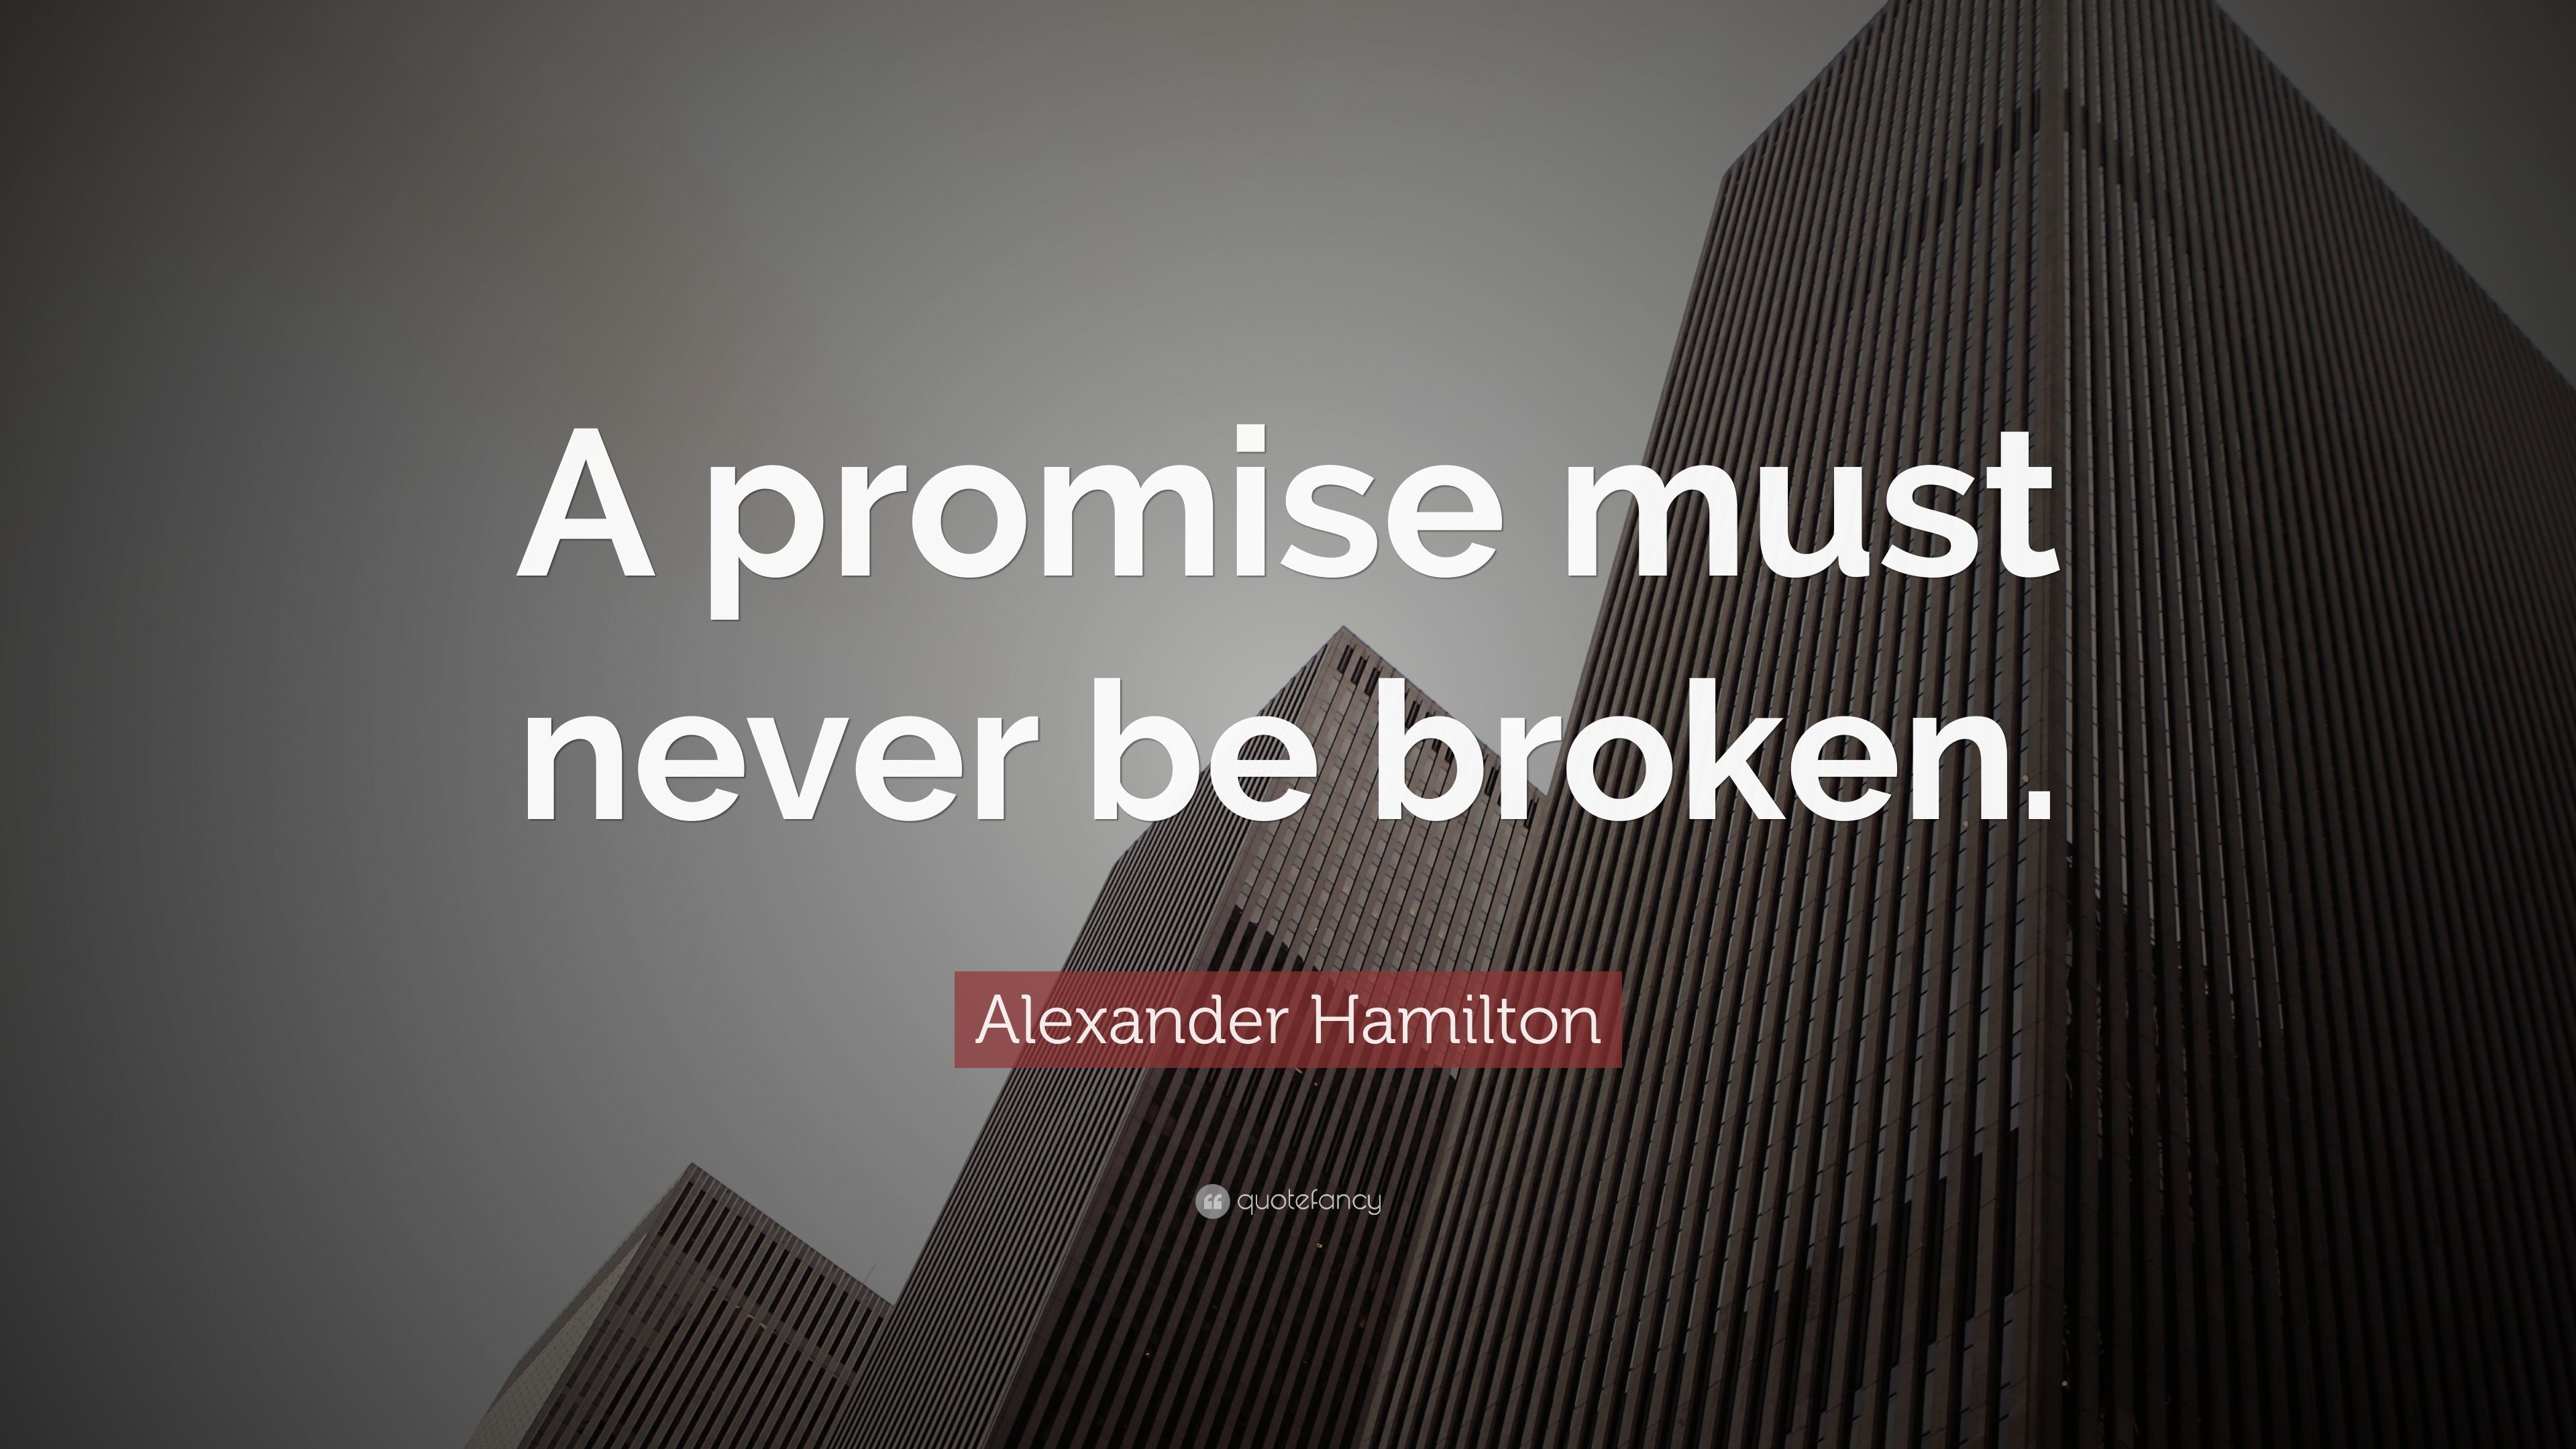 Alexander Hamilton Quote A promise must never be broken.